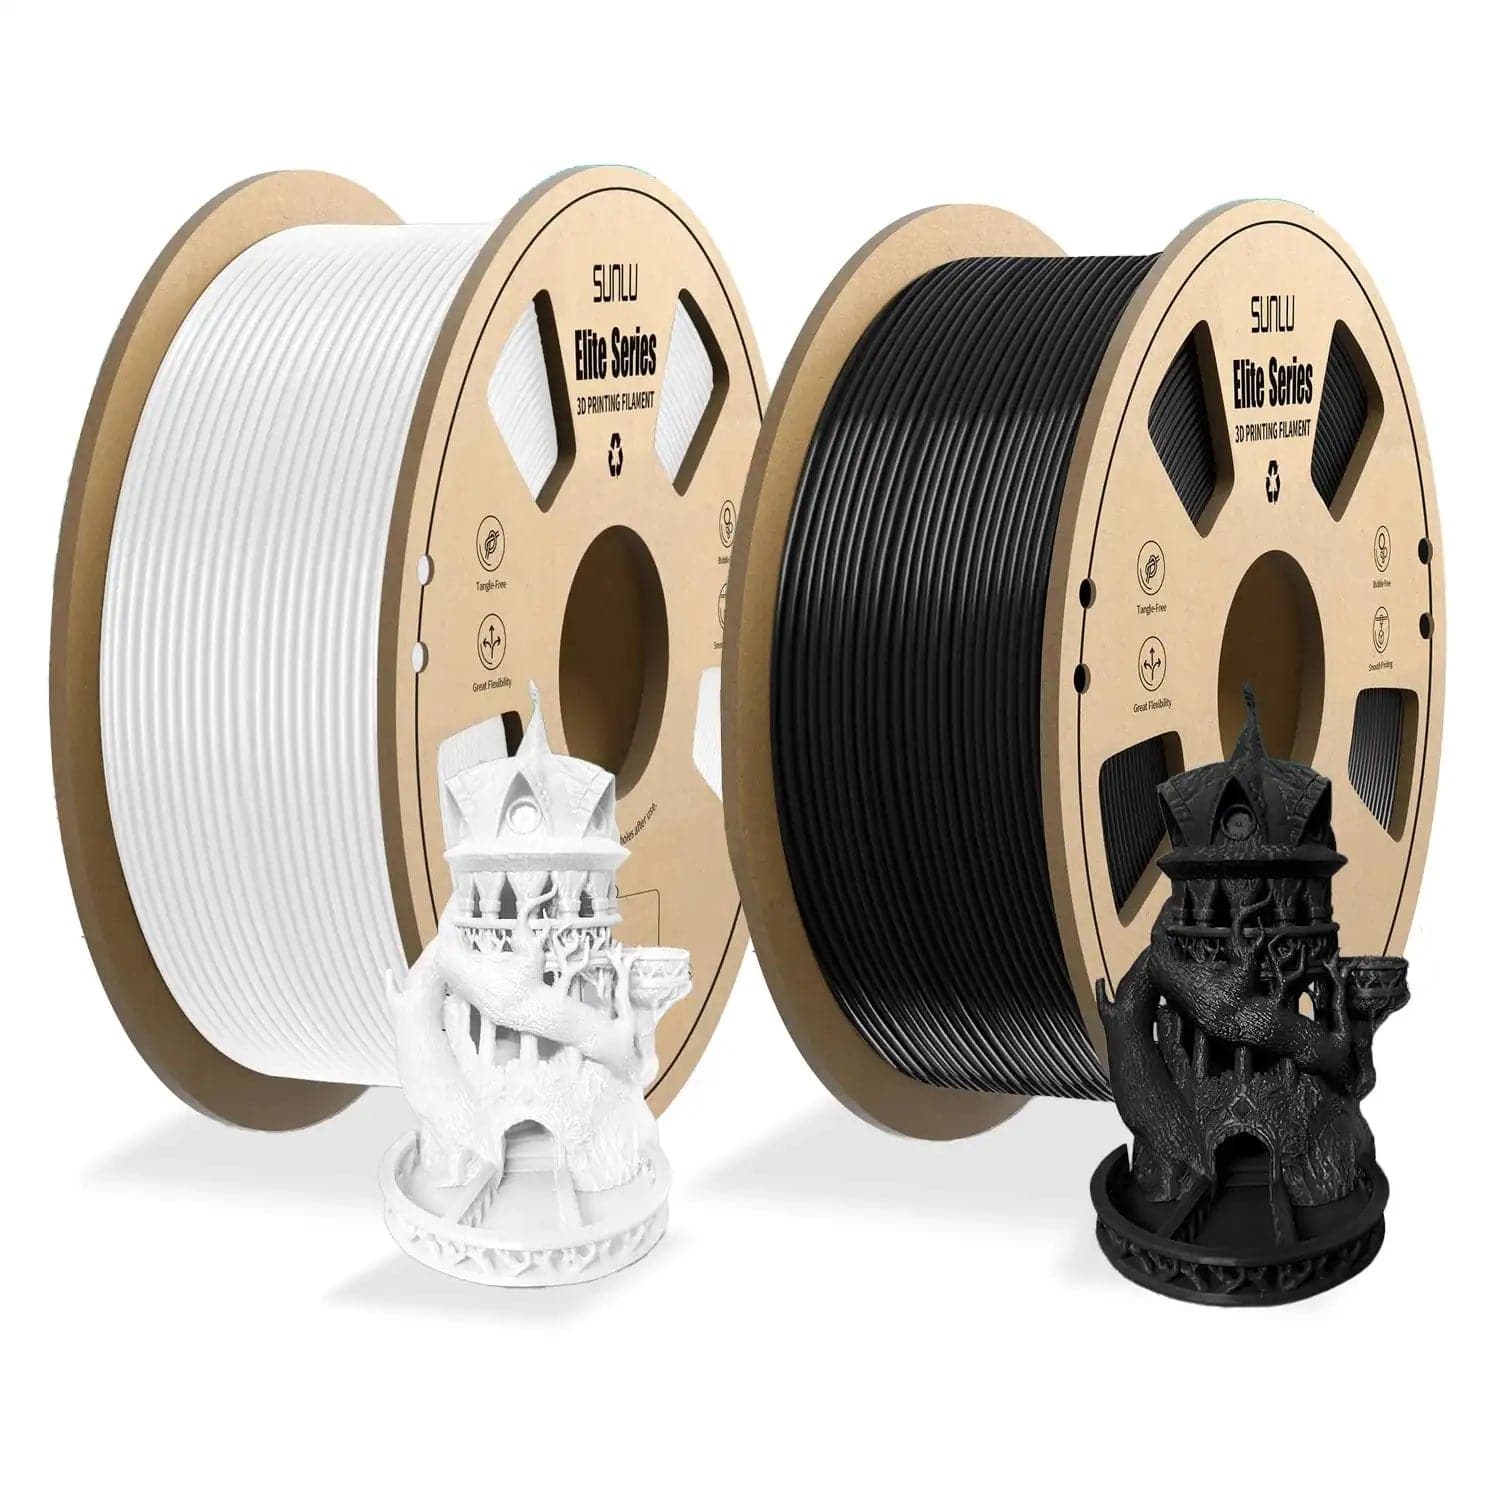 10kg Filament Combo-SUNLU Elite PETG Filament 1.75mm 1KGFeatures:


✅【Ship From Amazon FBA Warehouse】Same shipping service with Amazon. Enjoy reliable performance and fast shipping with the Amazon FBA Warehouse.
✅【High-Qu10kg Filament Combo-SUNLU Elite PETG Filament 13D Printing Materials